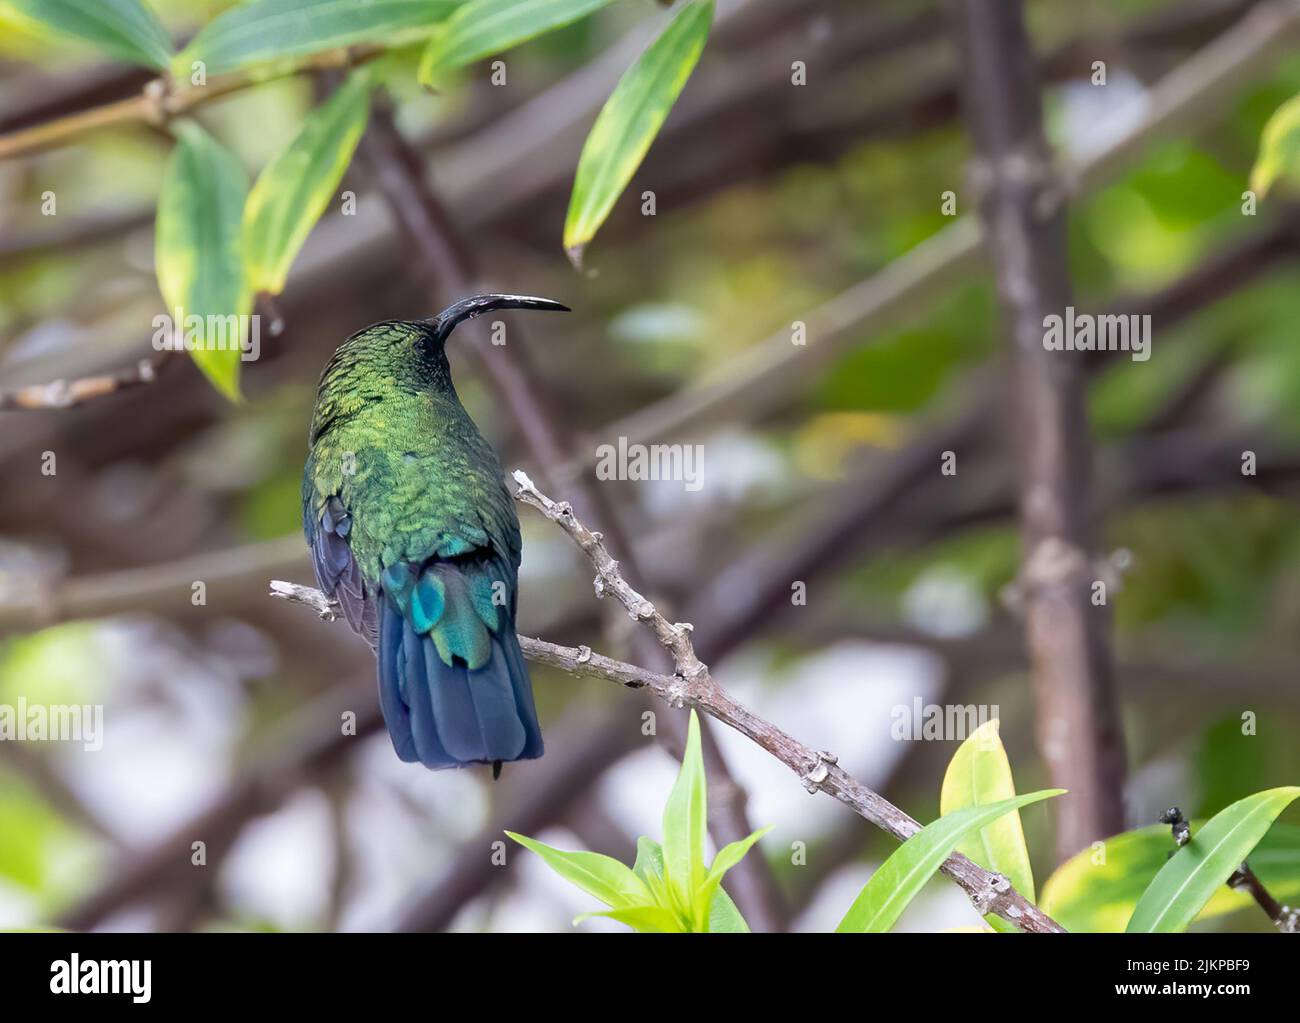 A back shot of a Green throated Carib standing on a tree branch on a sunny day with blurred background Stock Photo